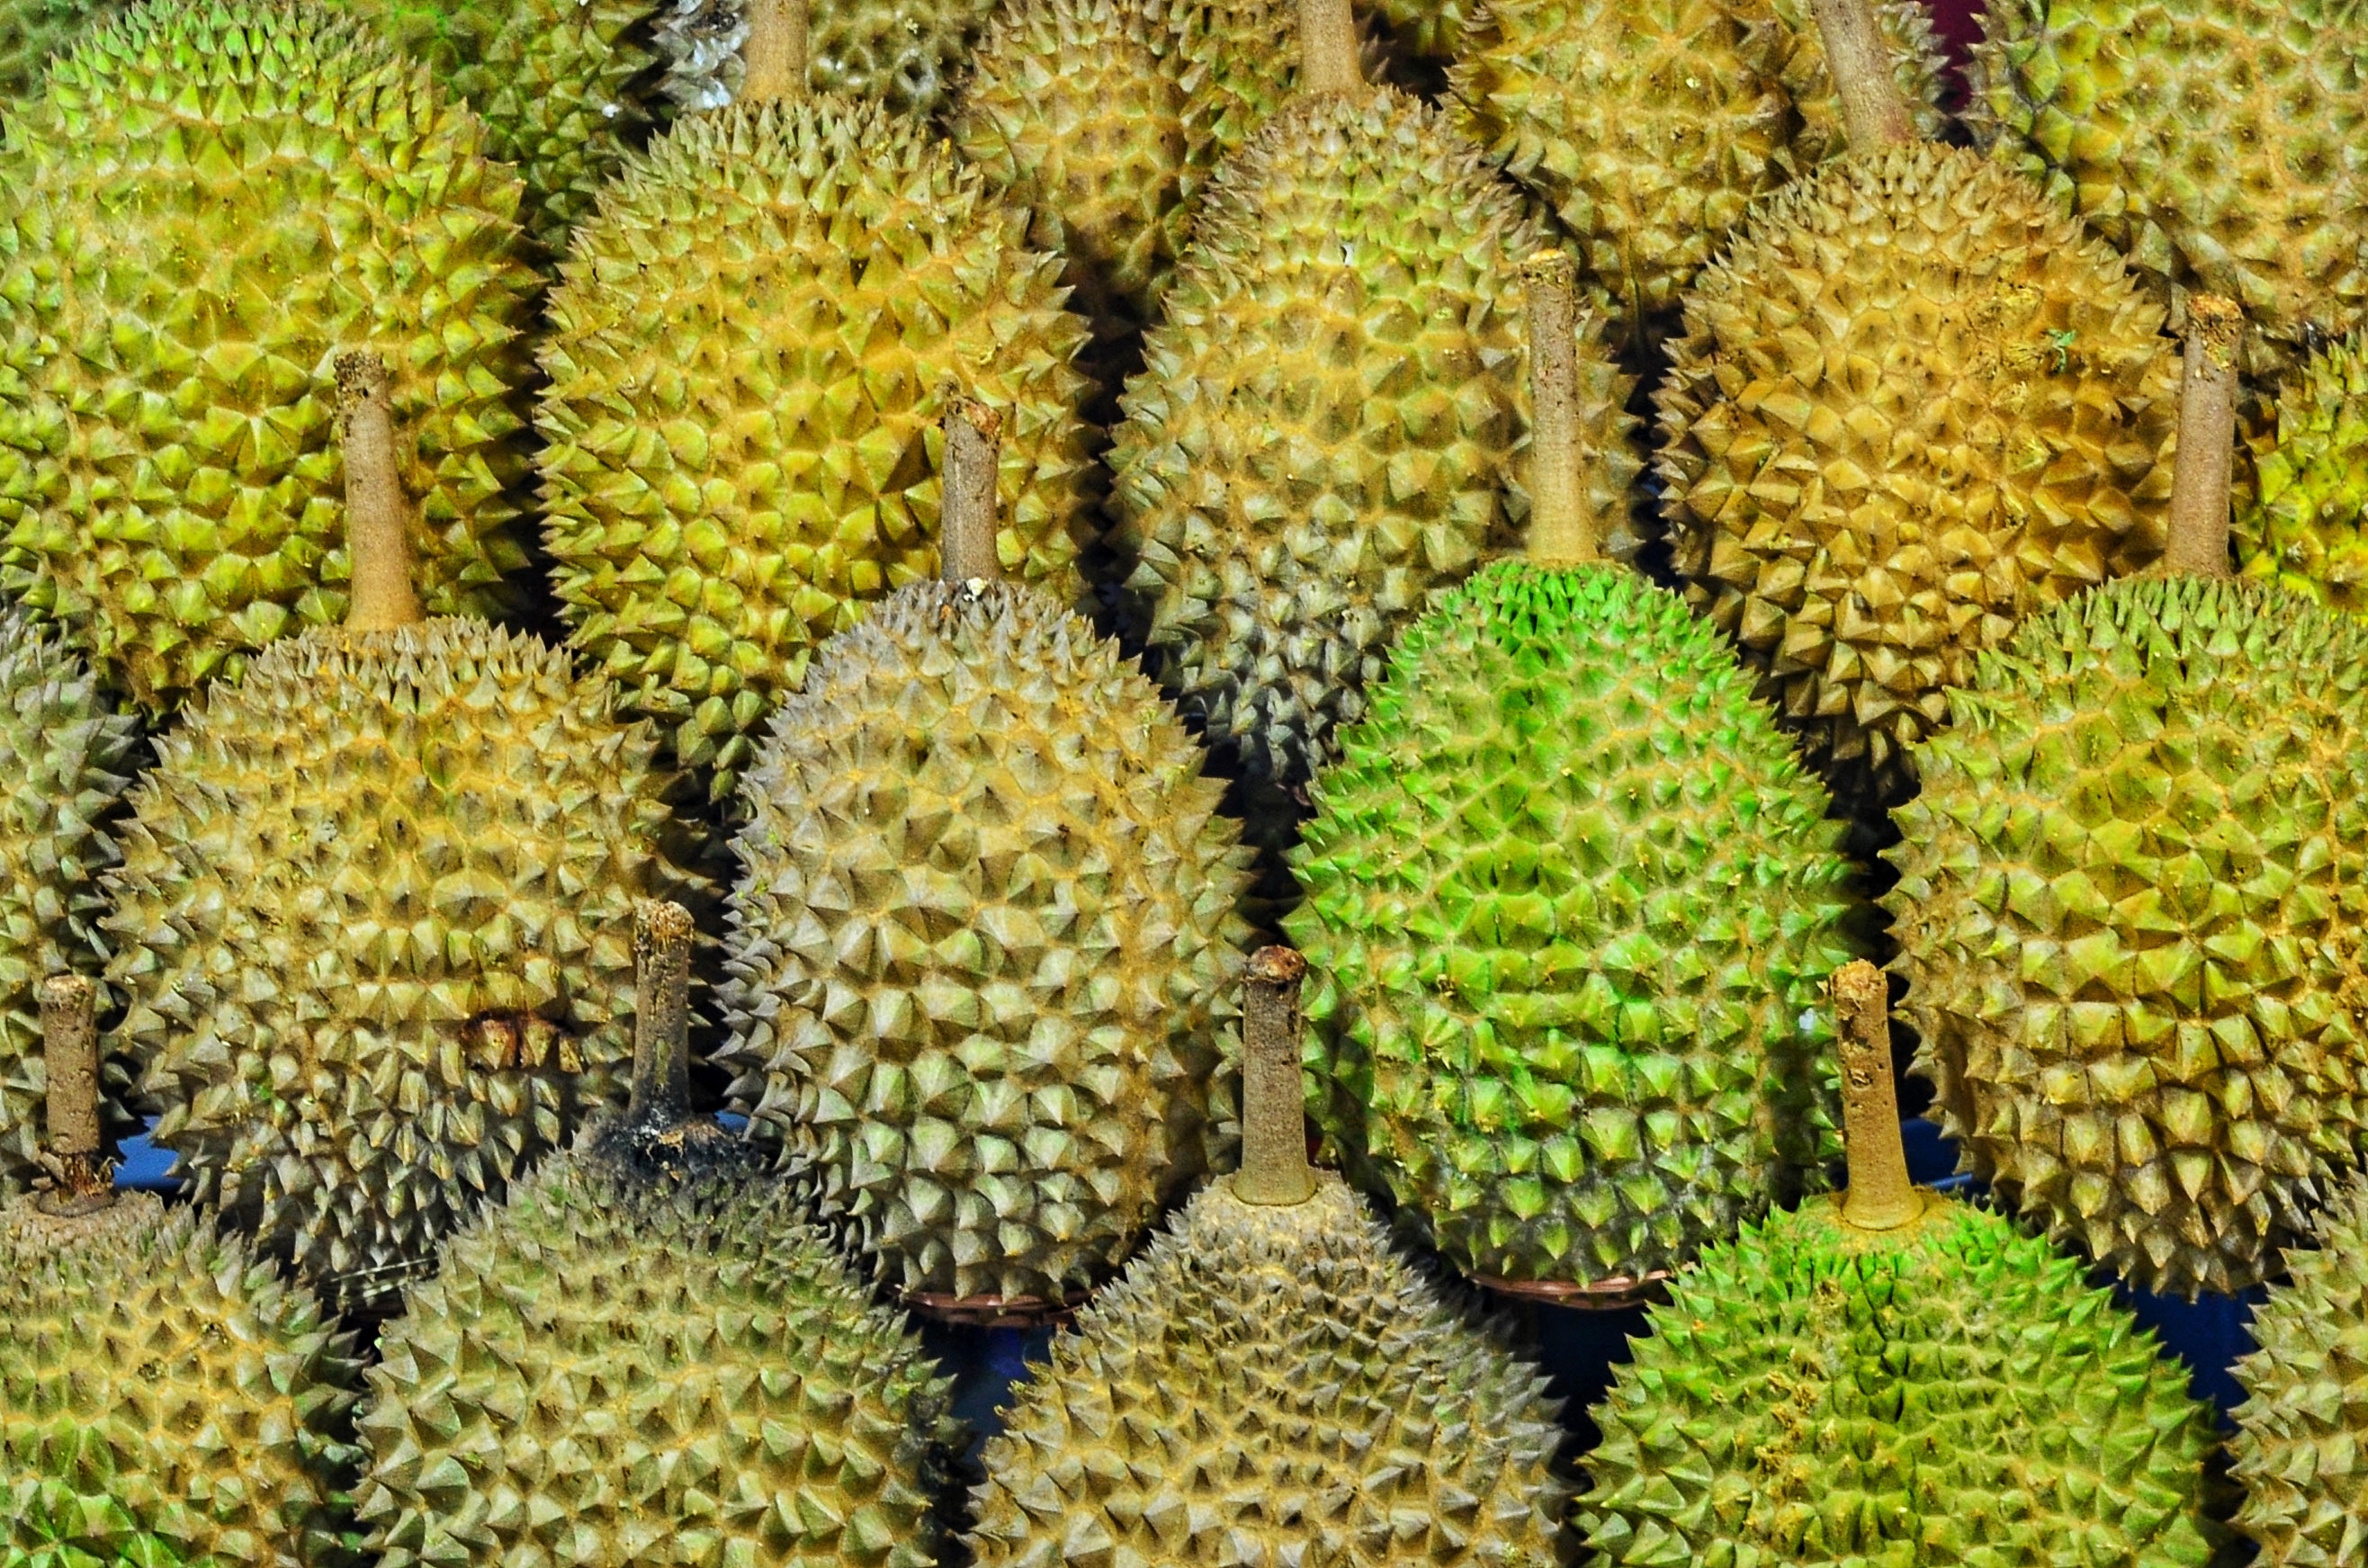 Johor — Seeking a Big Hit in a New Breed of Durian